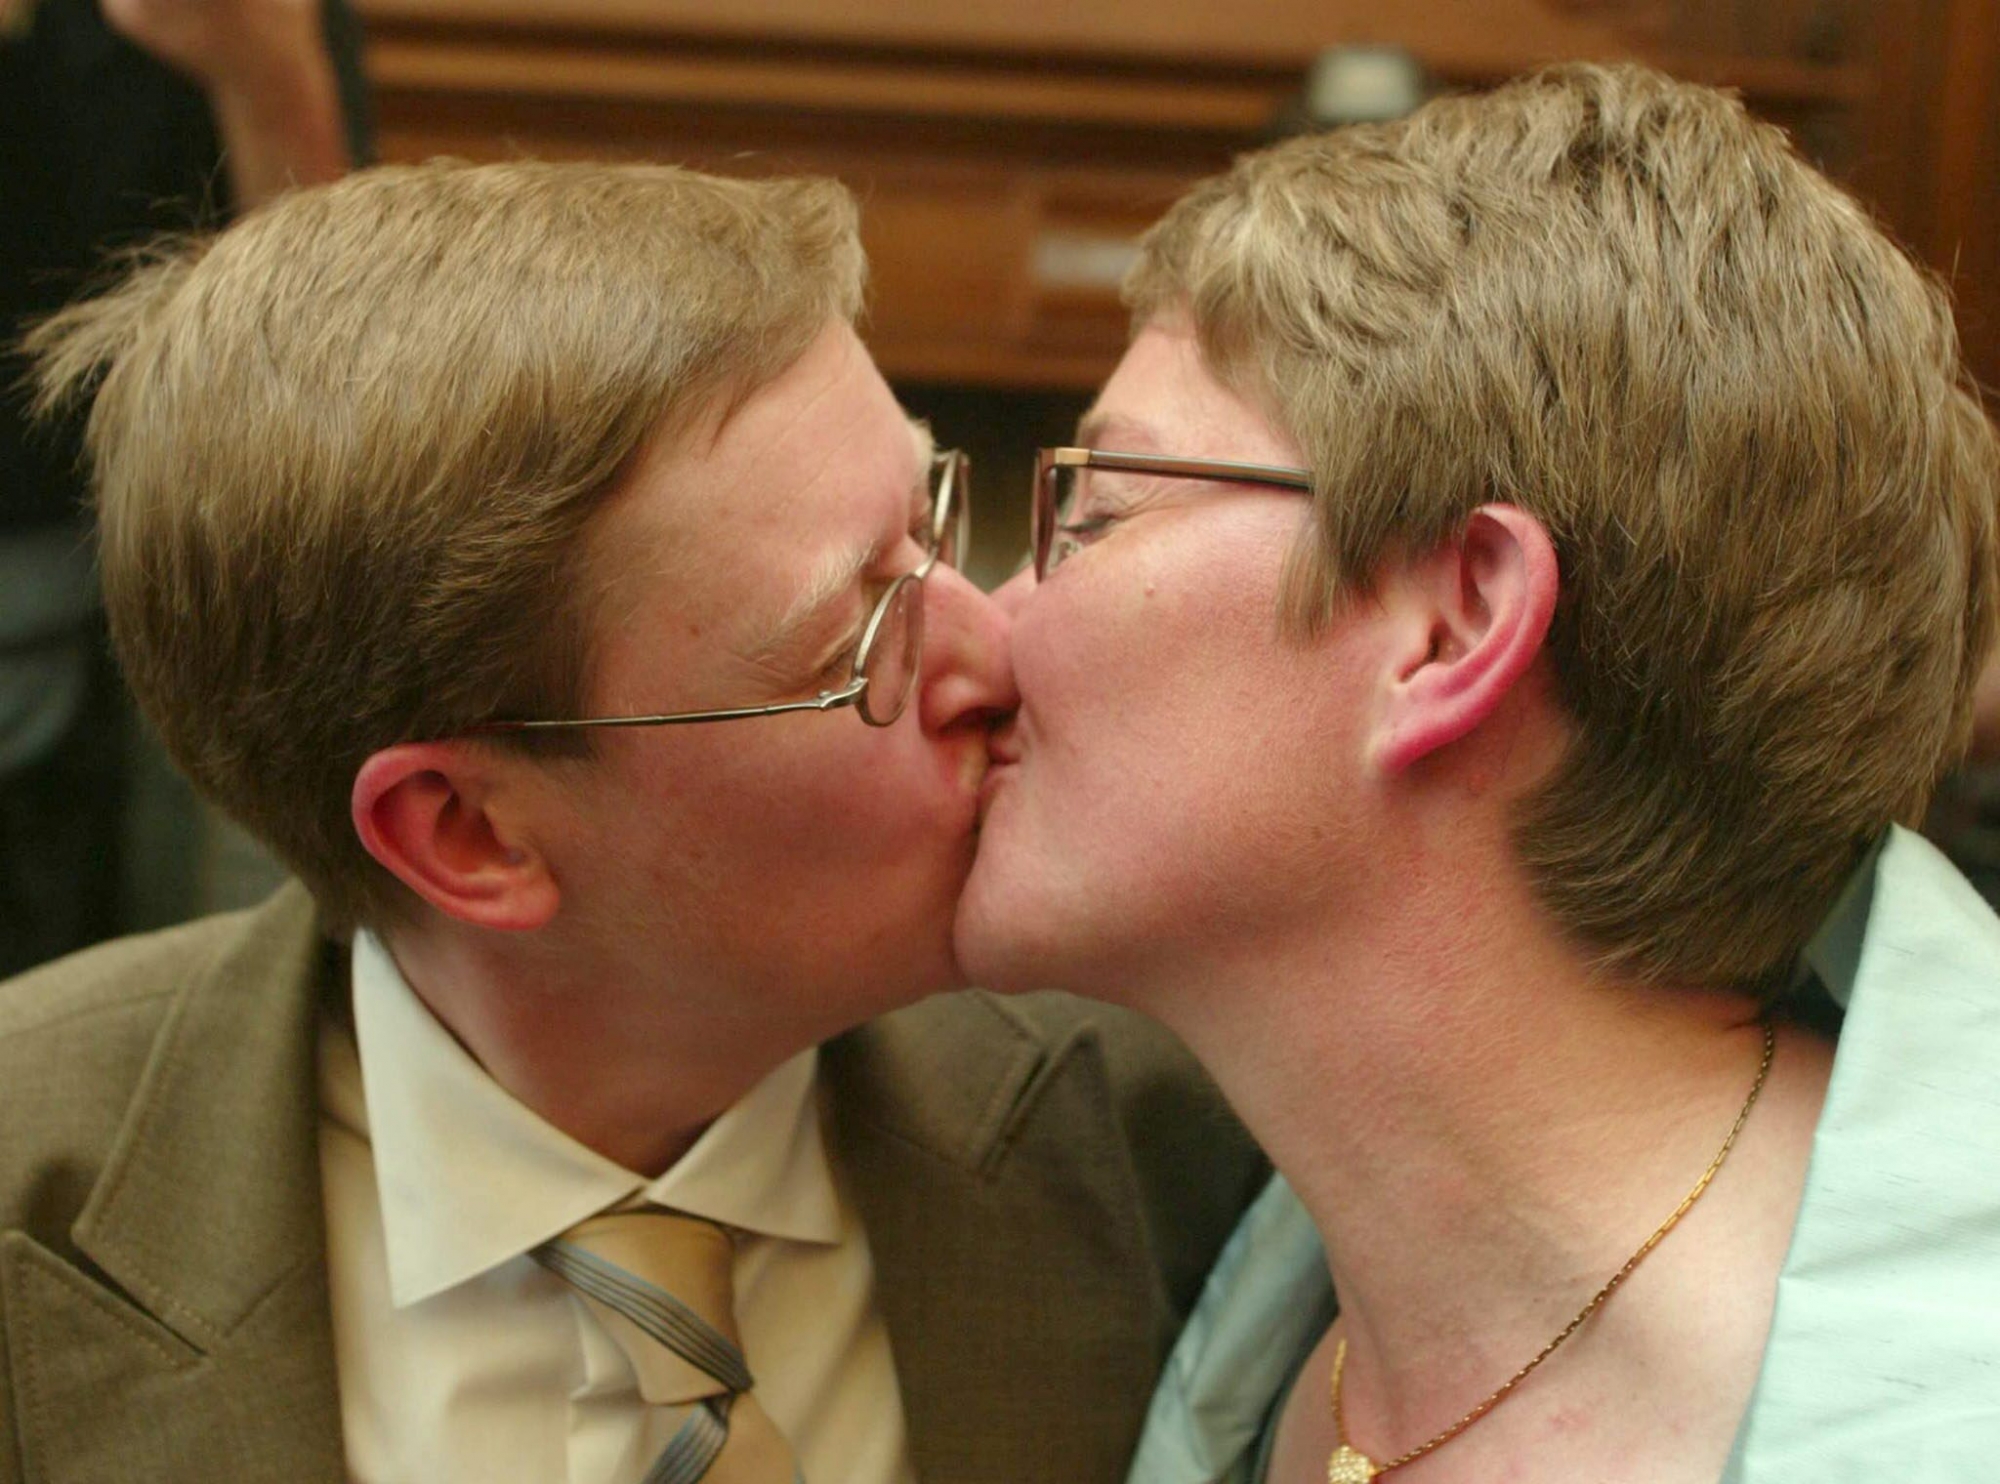 Marion Huibrechts (L) and Christel Verswyvelen (R) seal their wedding vows with a kiss during their marriage ceremony onFriday, 06 June 2003, in Kapellen. The homosexual couple is the first to get married in Belgium.   EPA-PHOTO/BELGA/PETER DE VOECHT